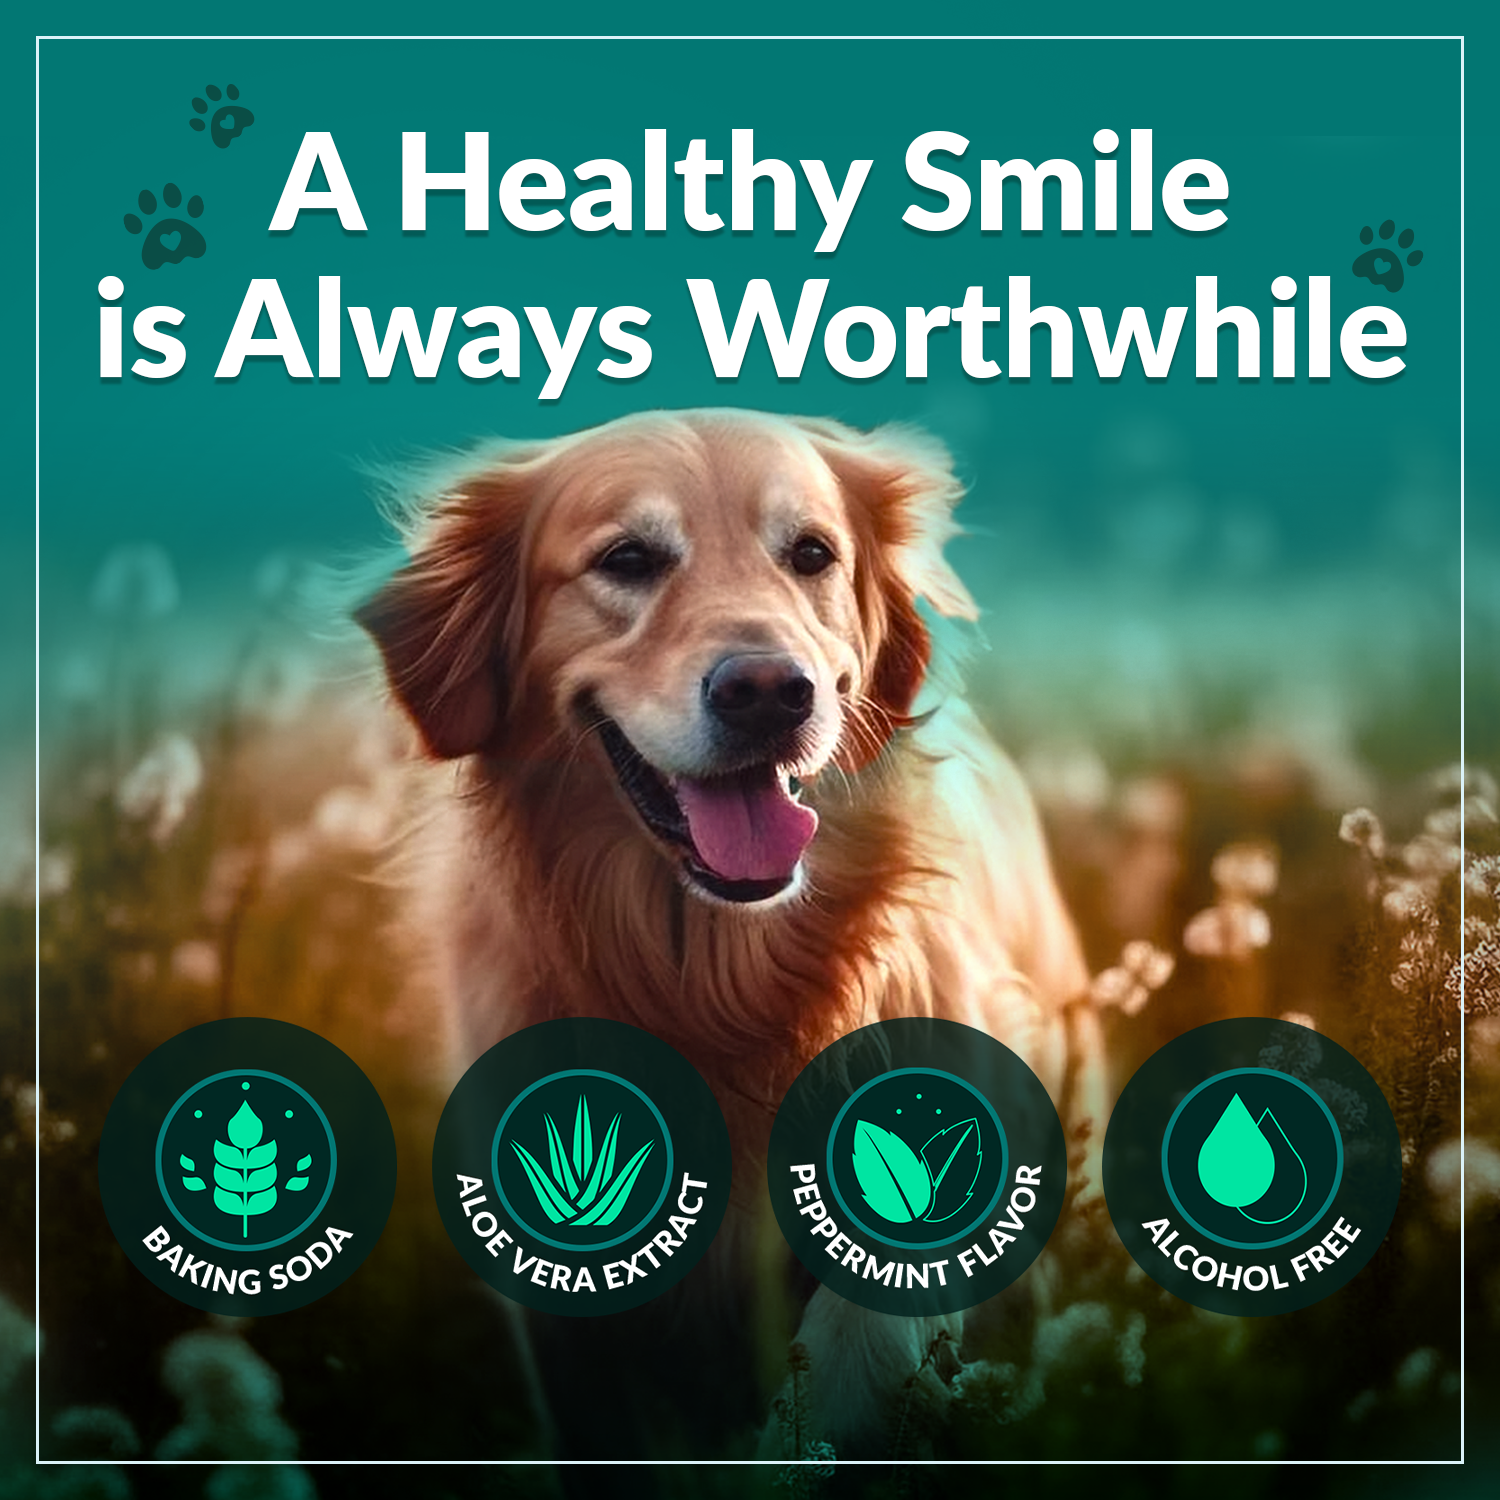 A healthy smile is always worthwile